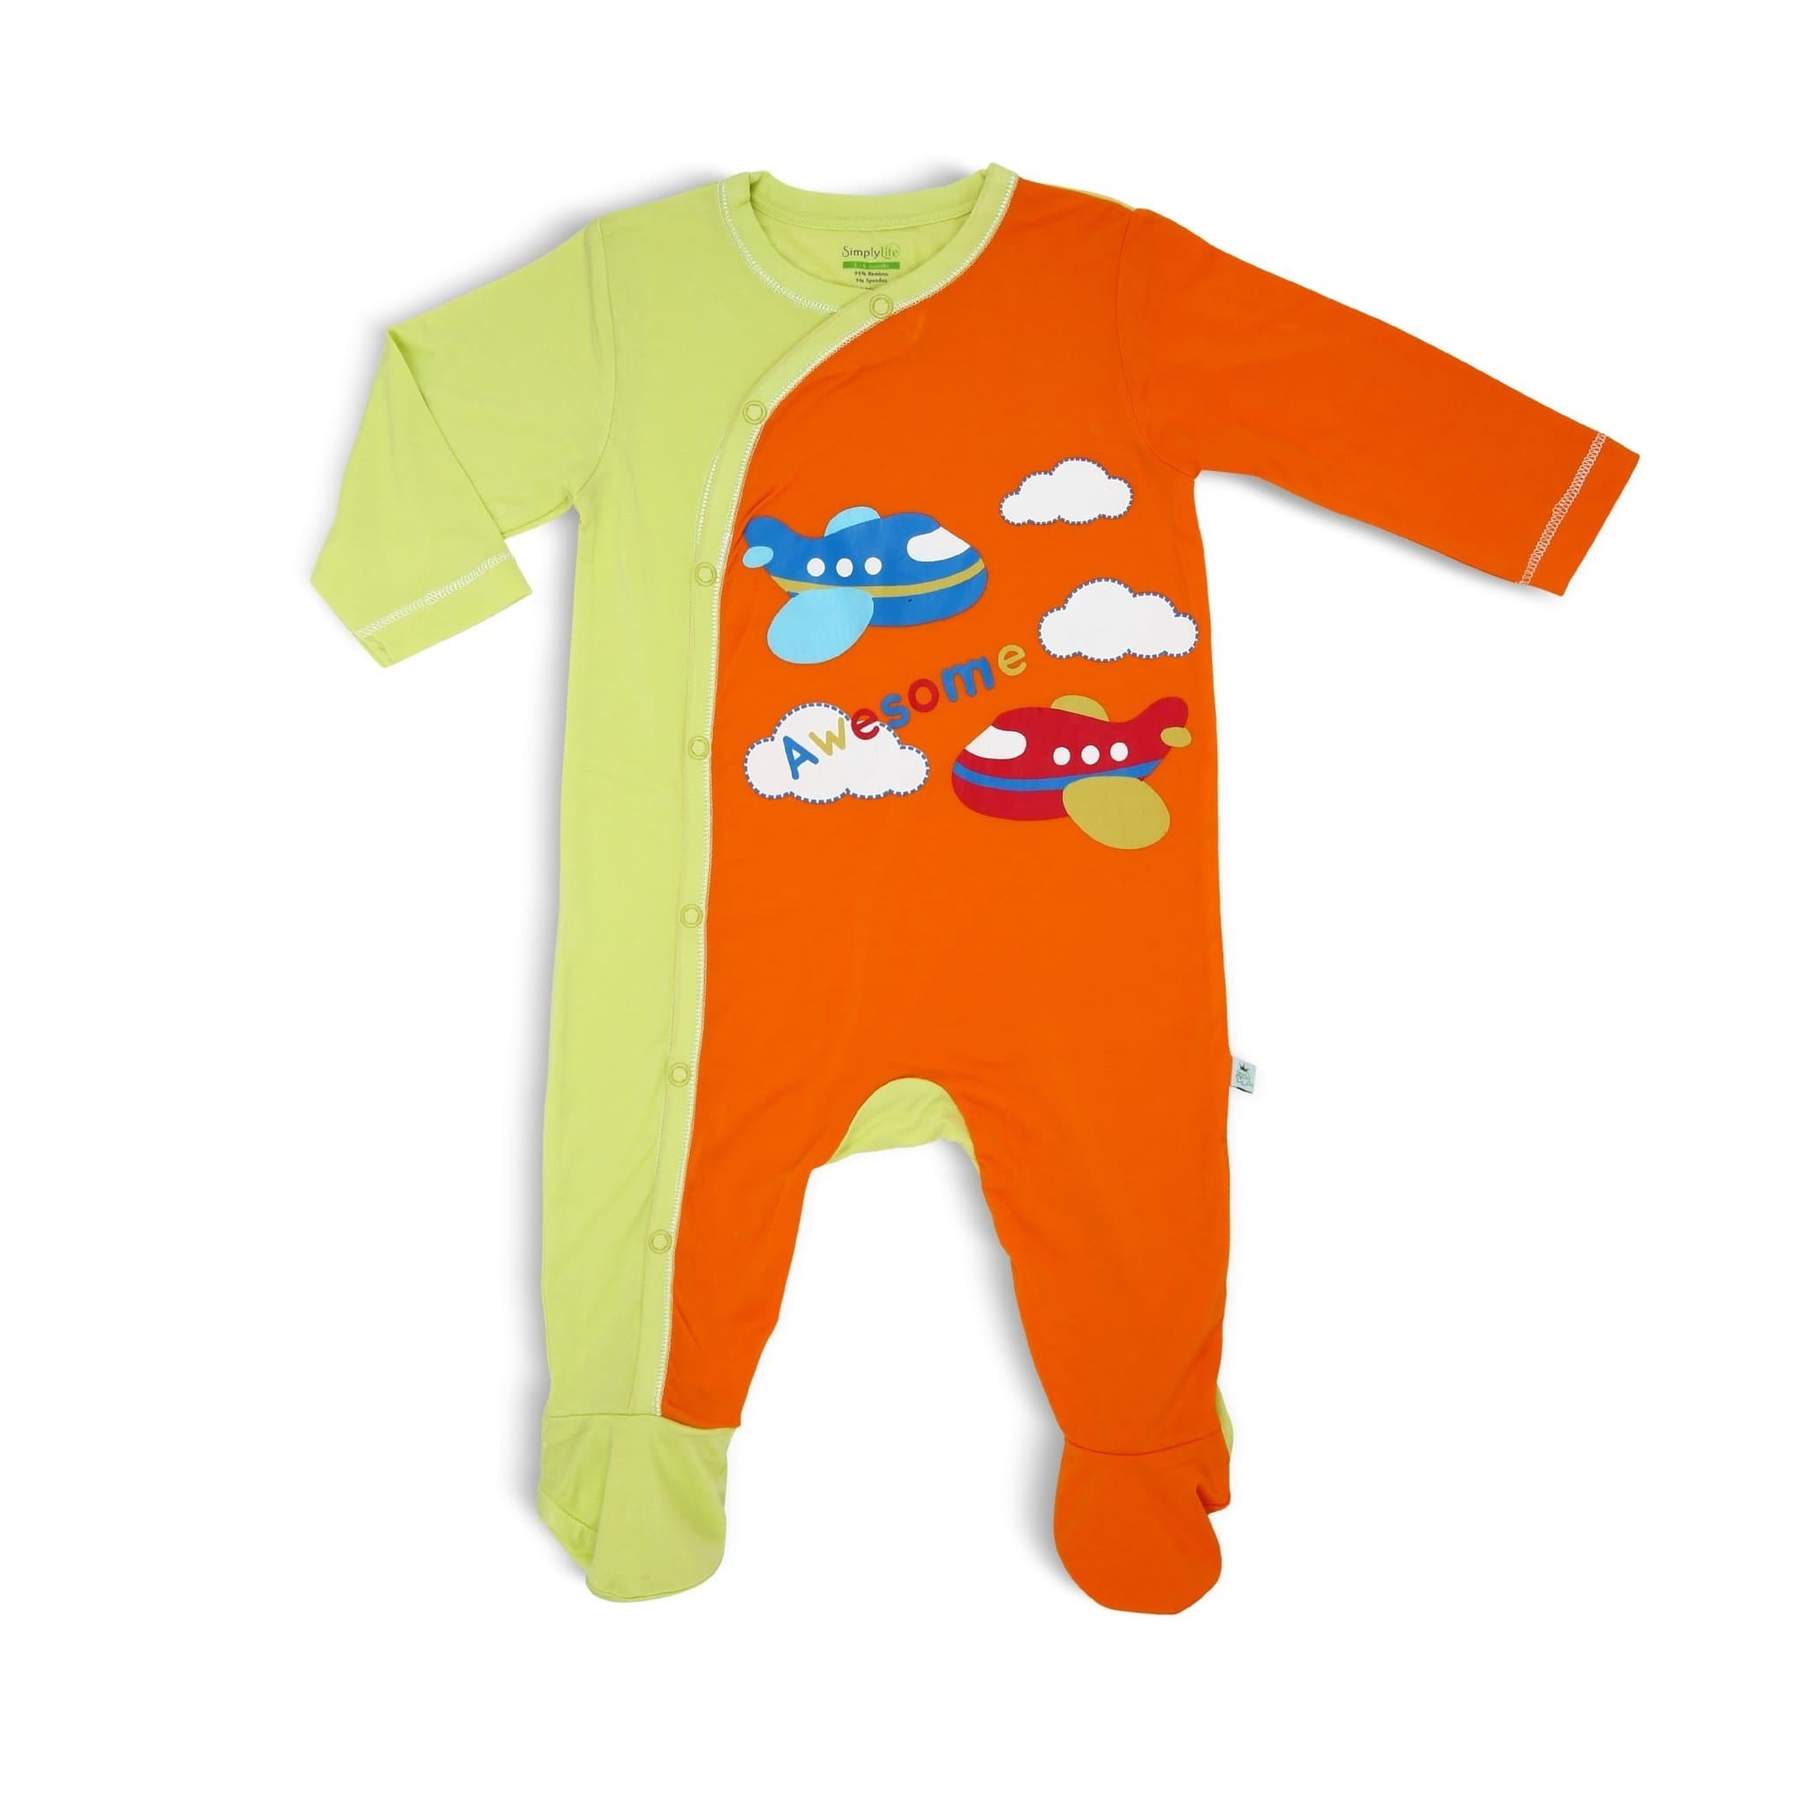 Simply Life Bamboo Boy Sleepsuits with Side Snap button with Spot Print (Various sizes available)